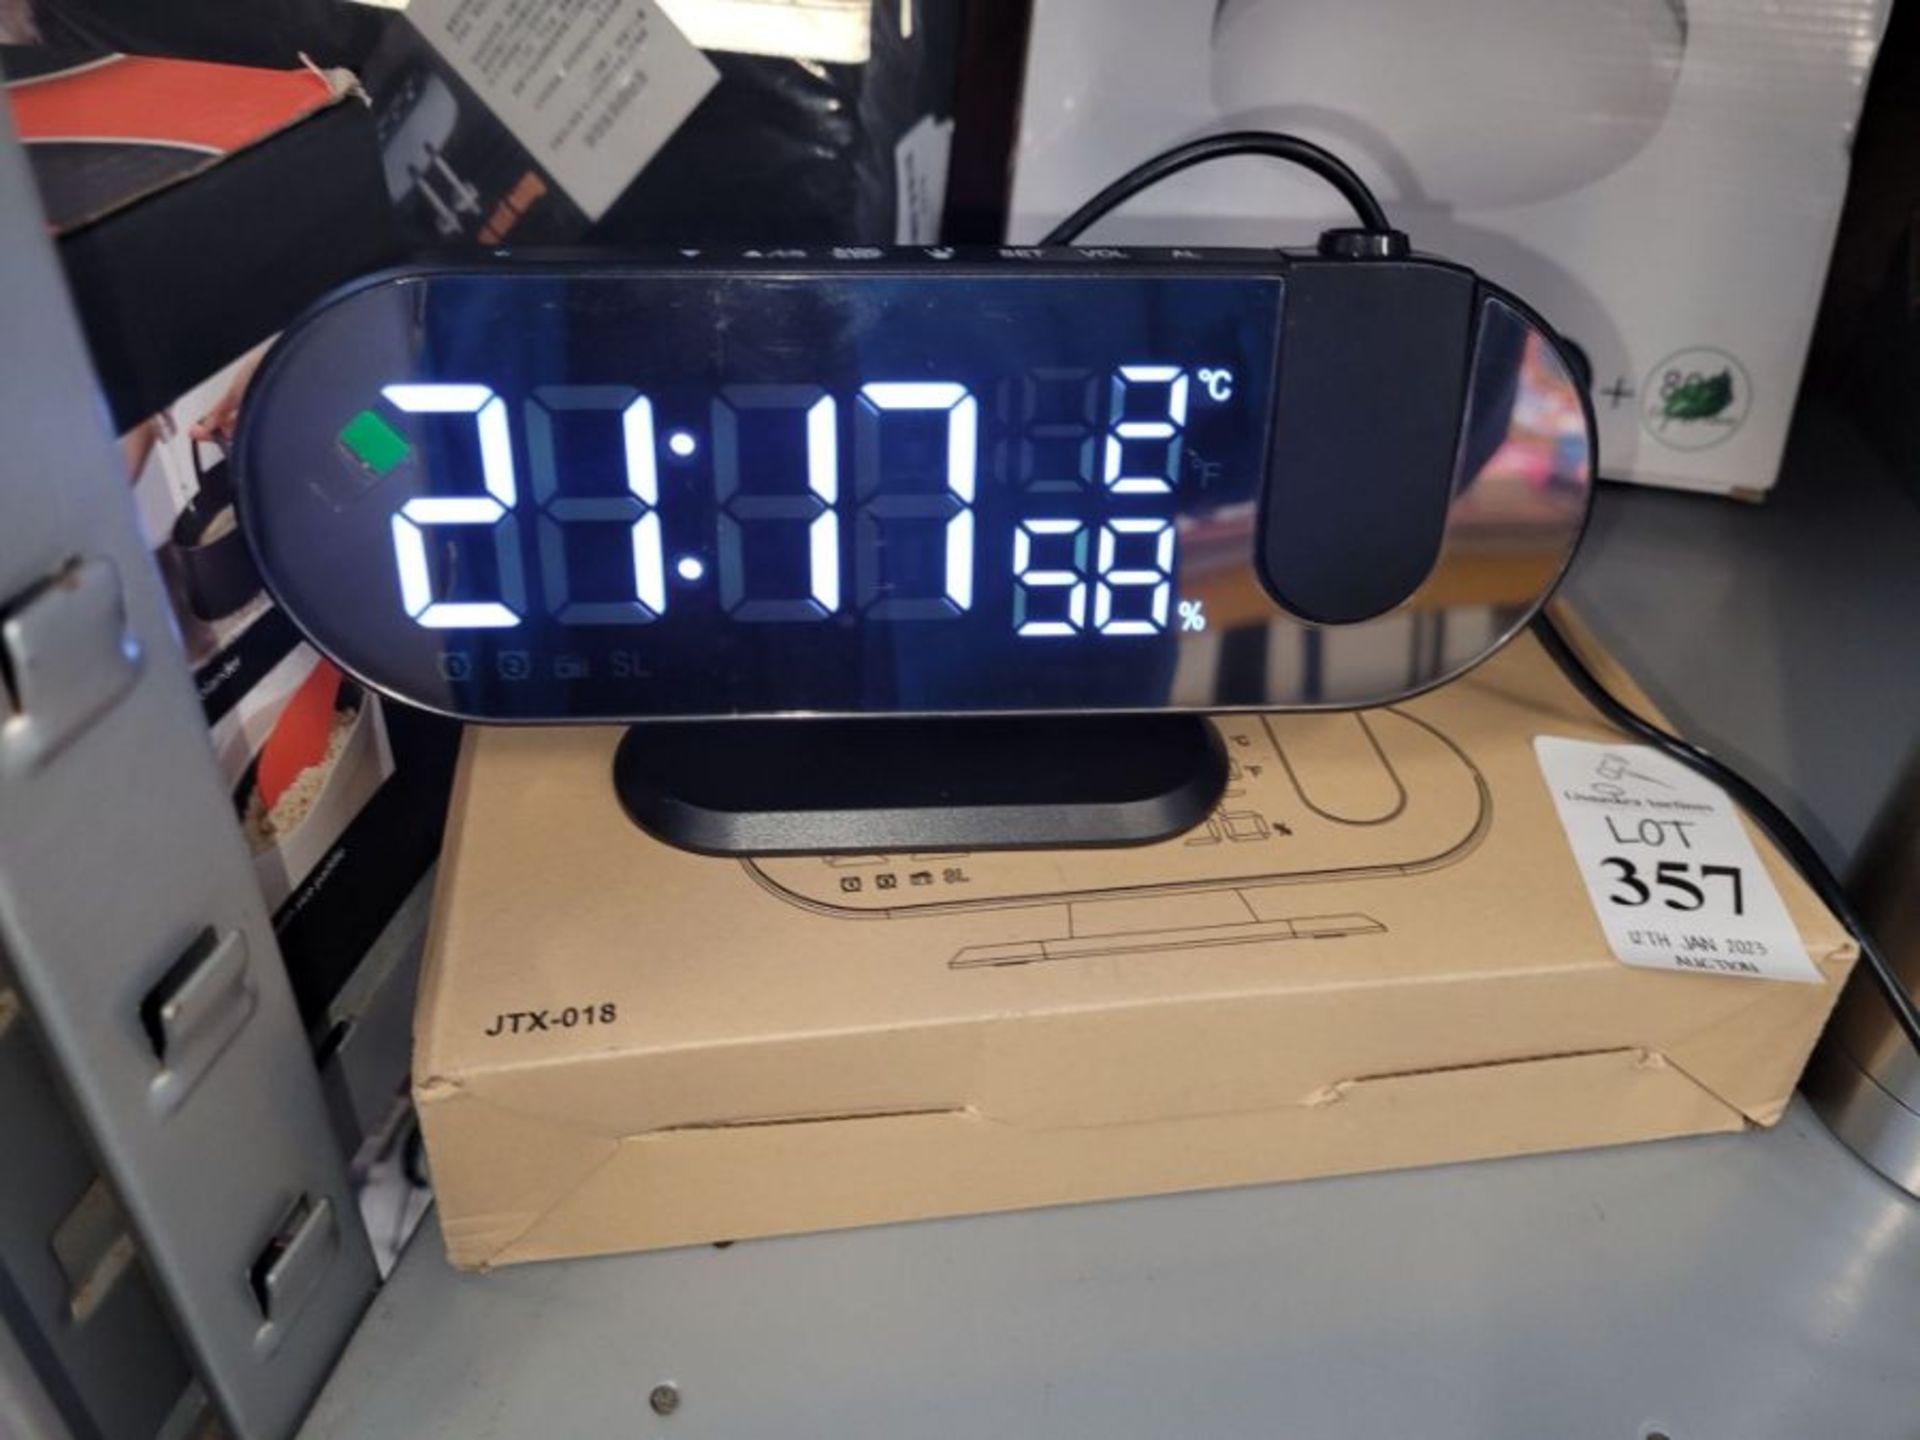 ALARM CLOCK WITH PROJECTOR LIGHT (WORKING)